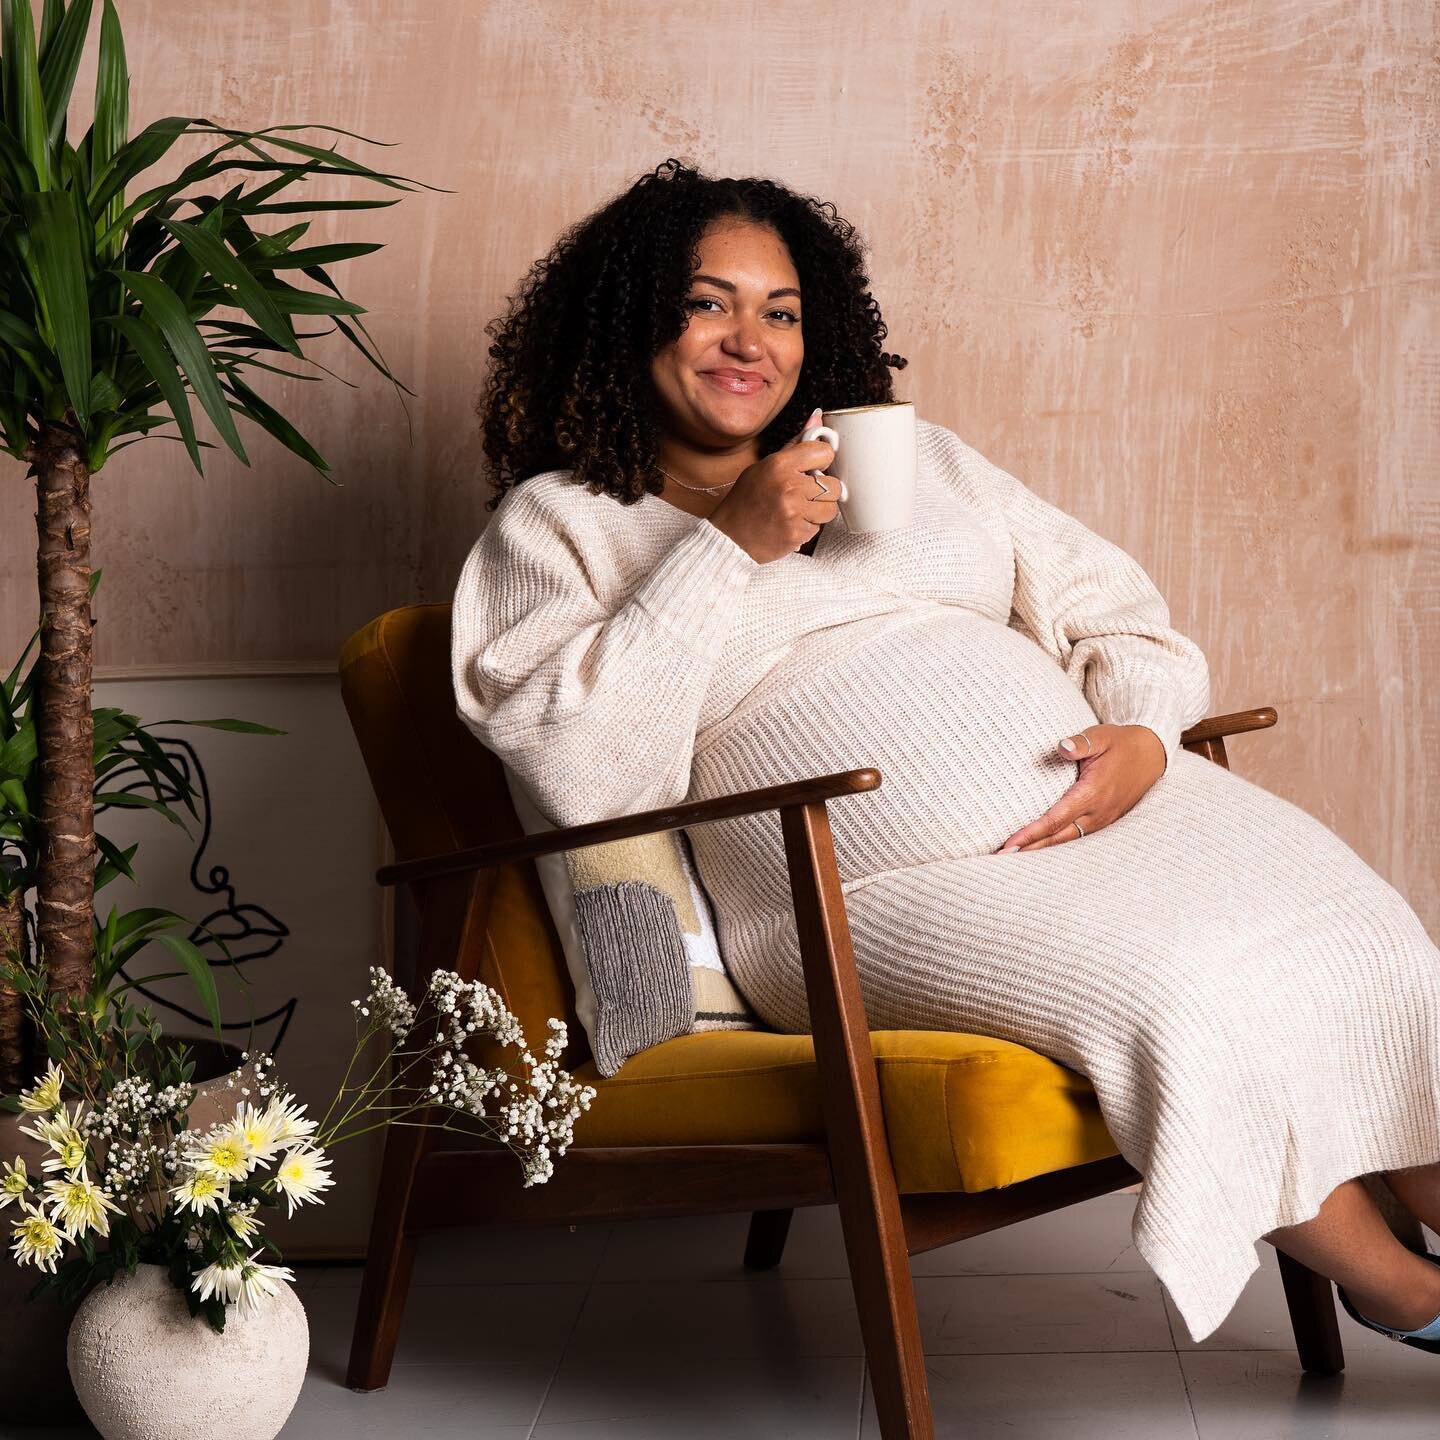 Happy International Women&rsquo;s Day 🍵 

For those of you who are new here, hi I&rsquo;m Rianna the Founder of Tea &amp; Me 👋🏽🥰. As you can see, I&rsquo;m currently flowing through my journey into Motherhood and nearly 9 months pregnant! Loving 